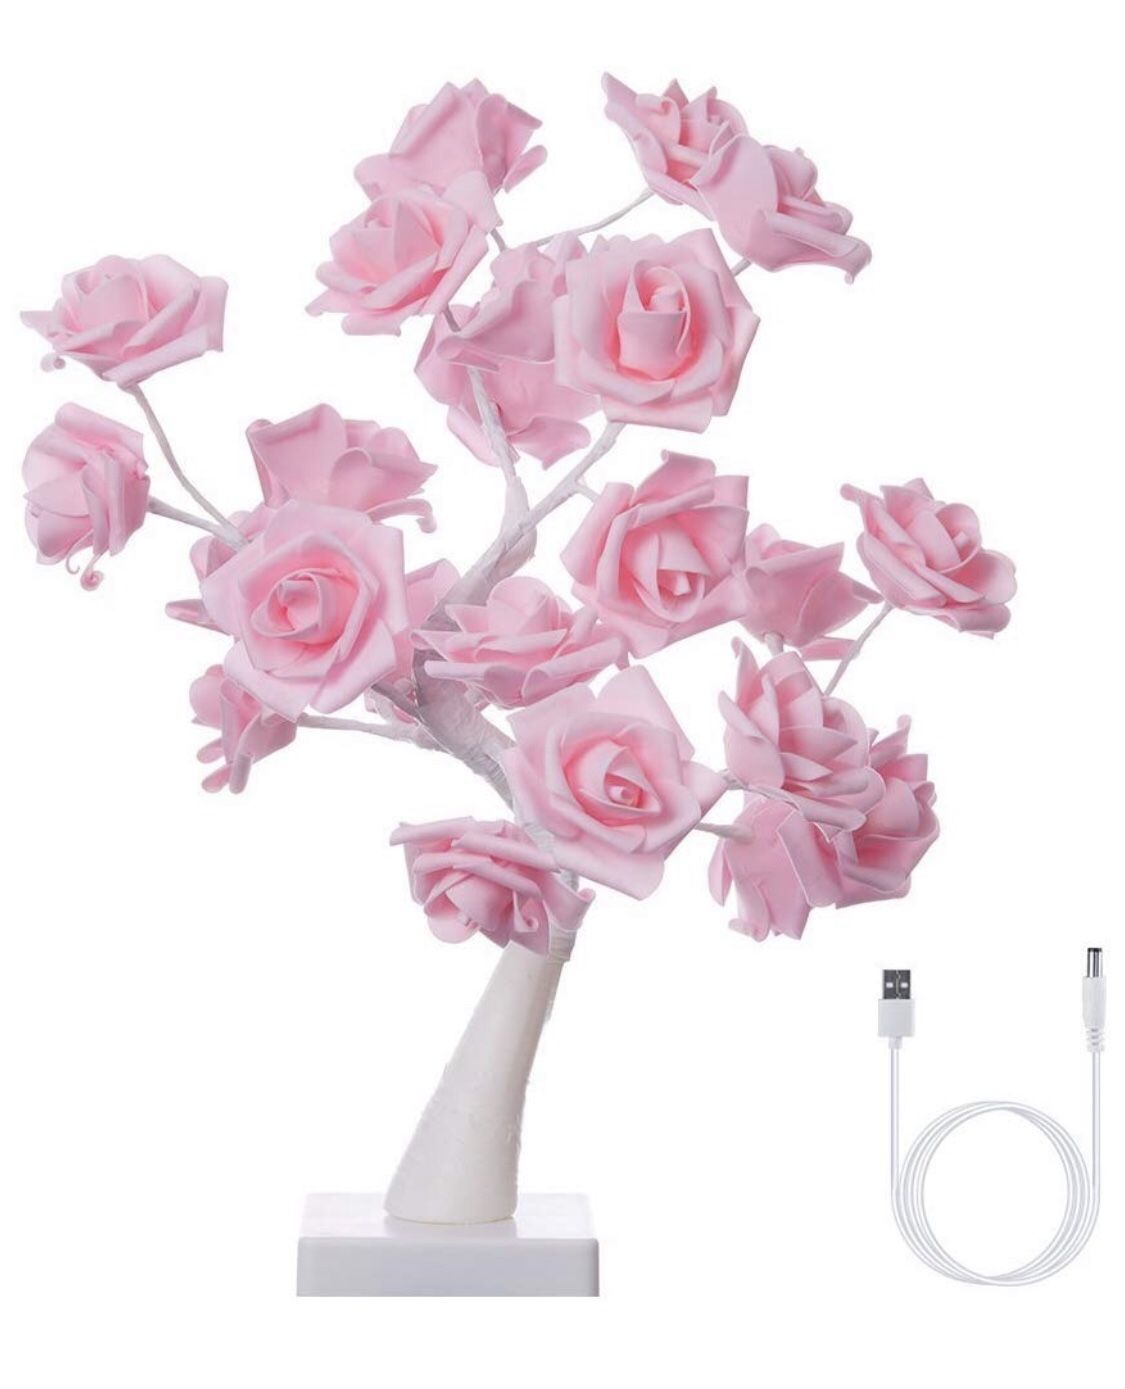 Finether Table Lamp Adjustable Rose Flower Desk Lamp|1.64ft Pink Tree Light for Wedding Living Room Bedroom Party Home Decor with 24 Warm White LED L